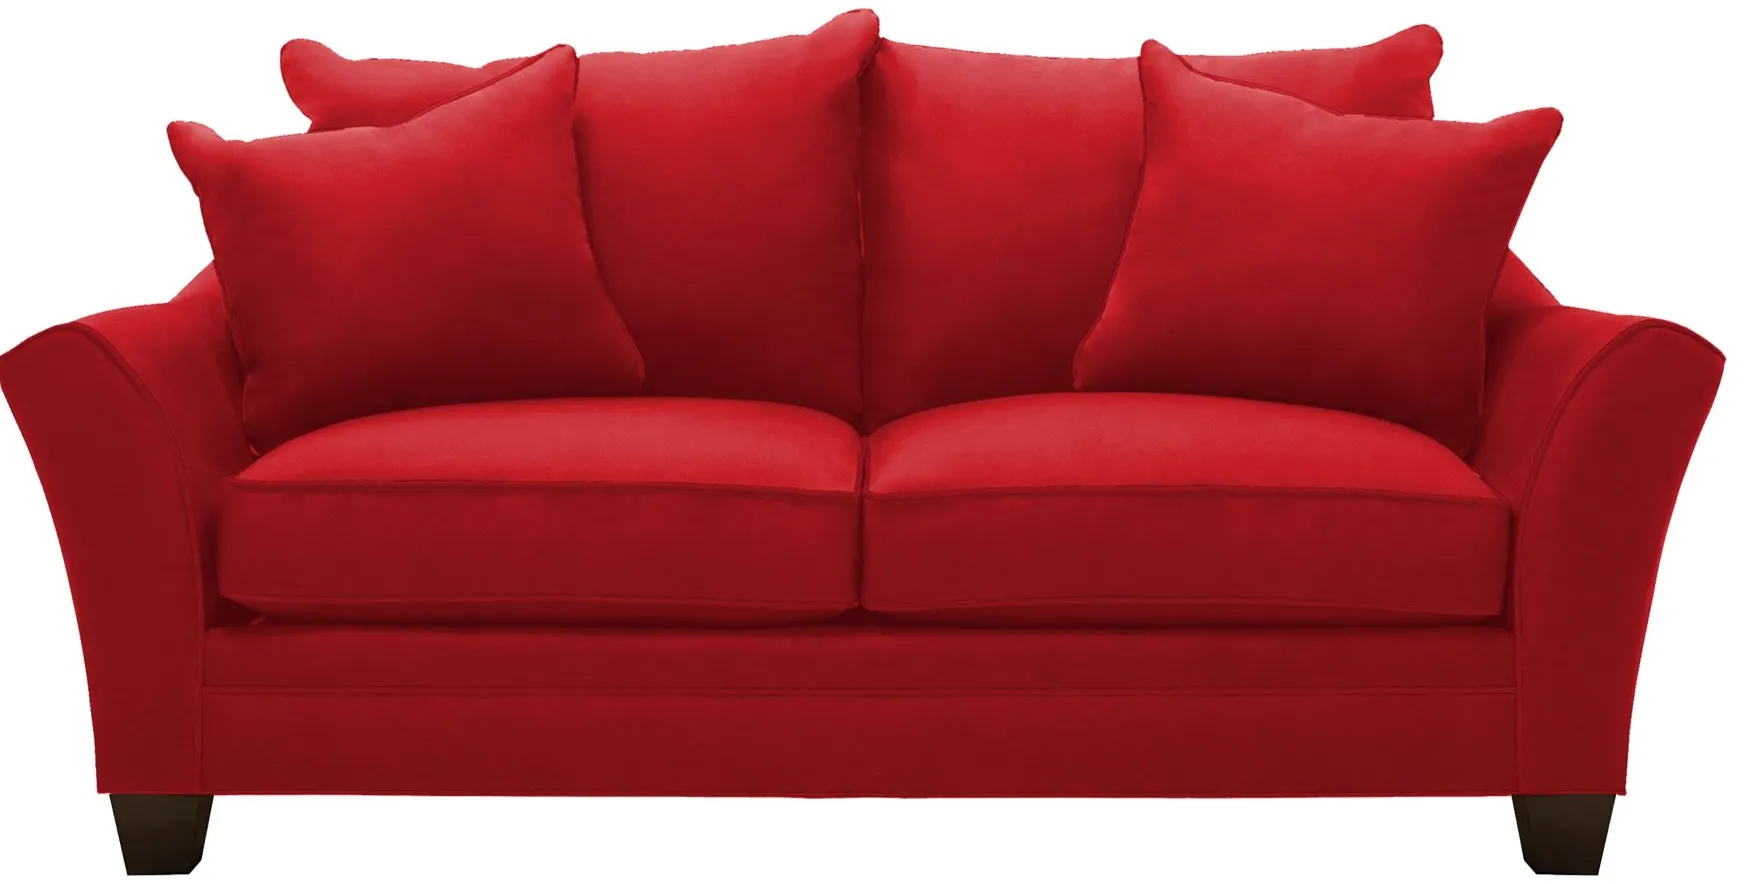 Briarwood Apartment Sofa in Suede So Soft Cardinal by H.M. Richards